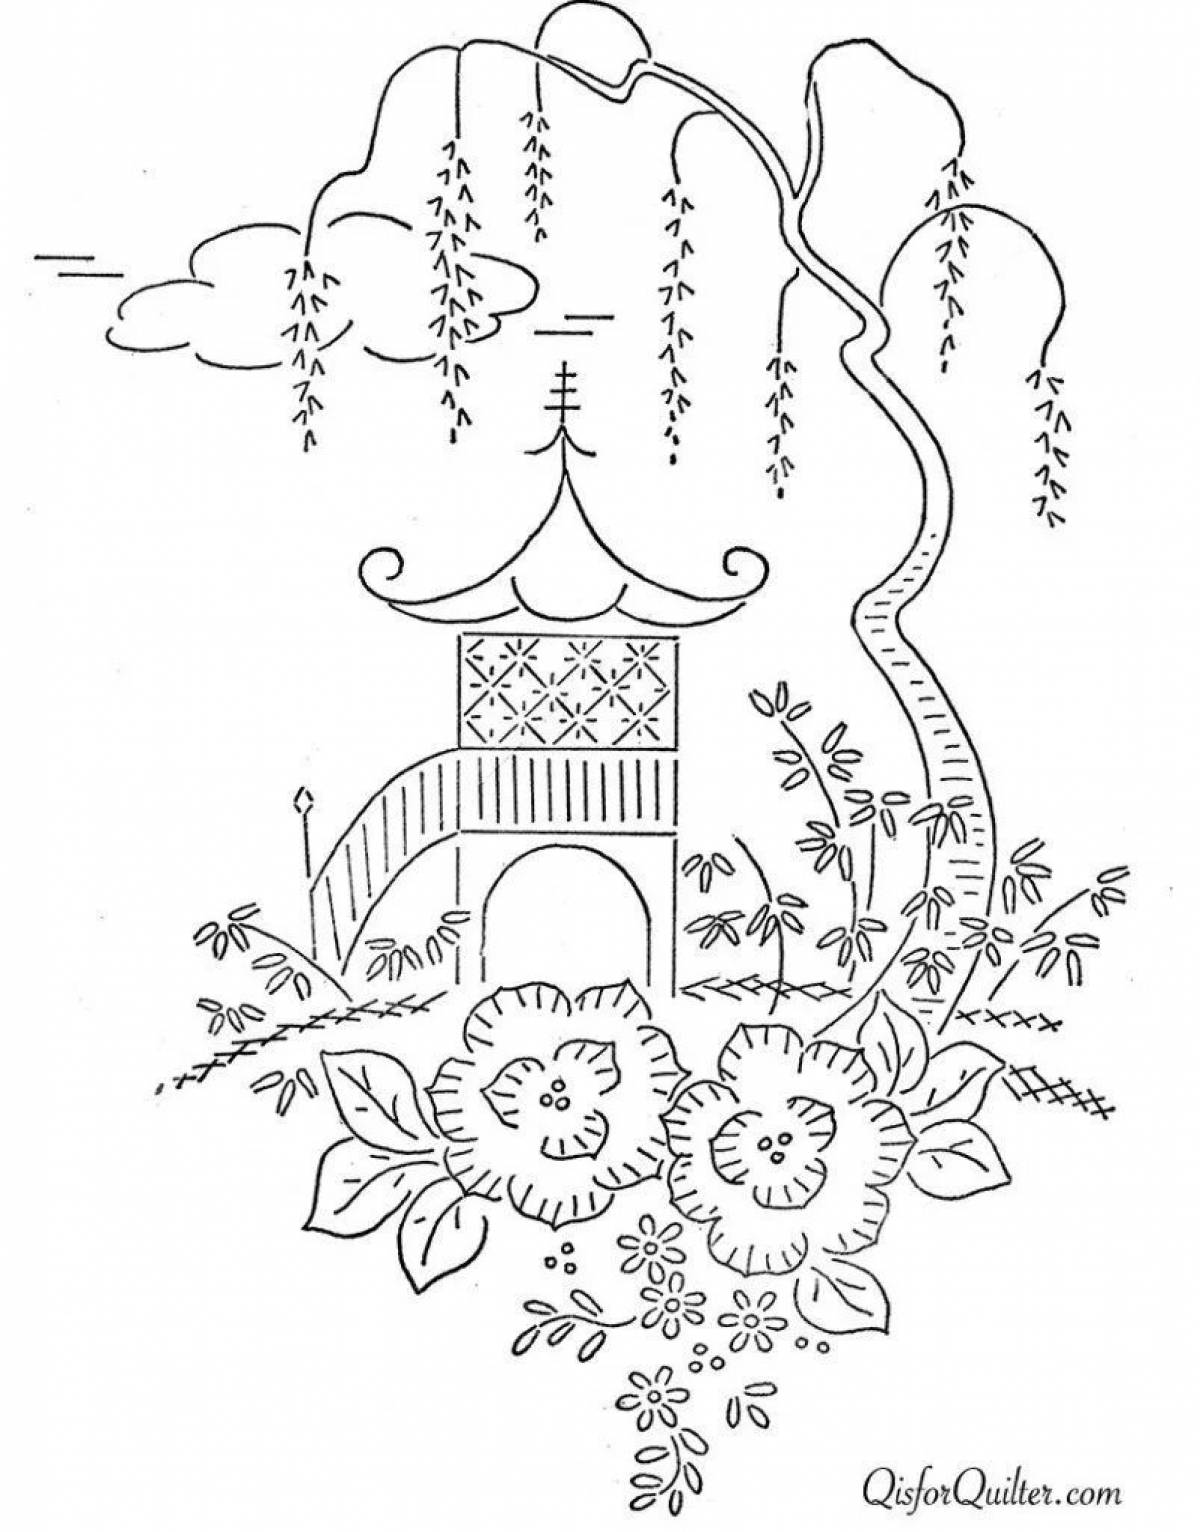 Great coloring book with Japanese motifs